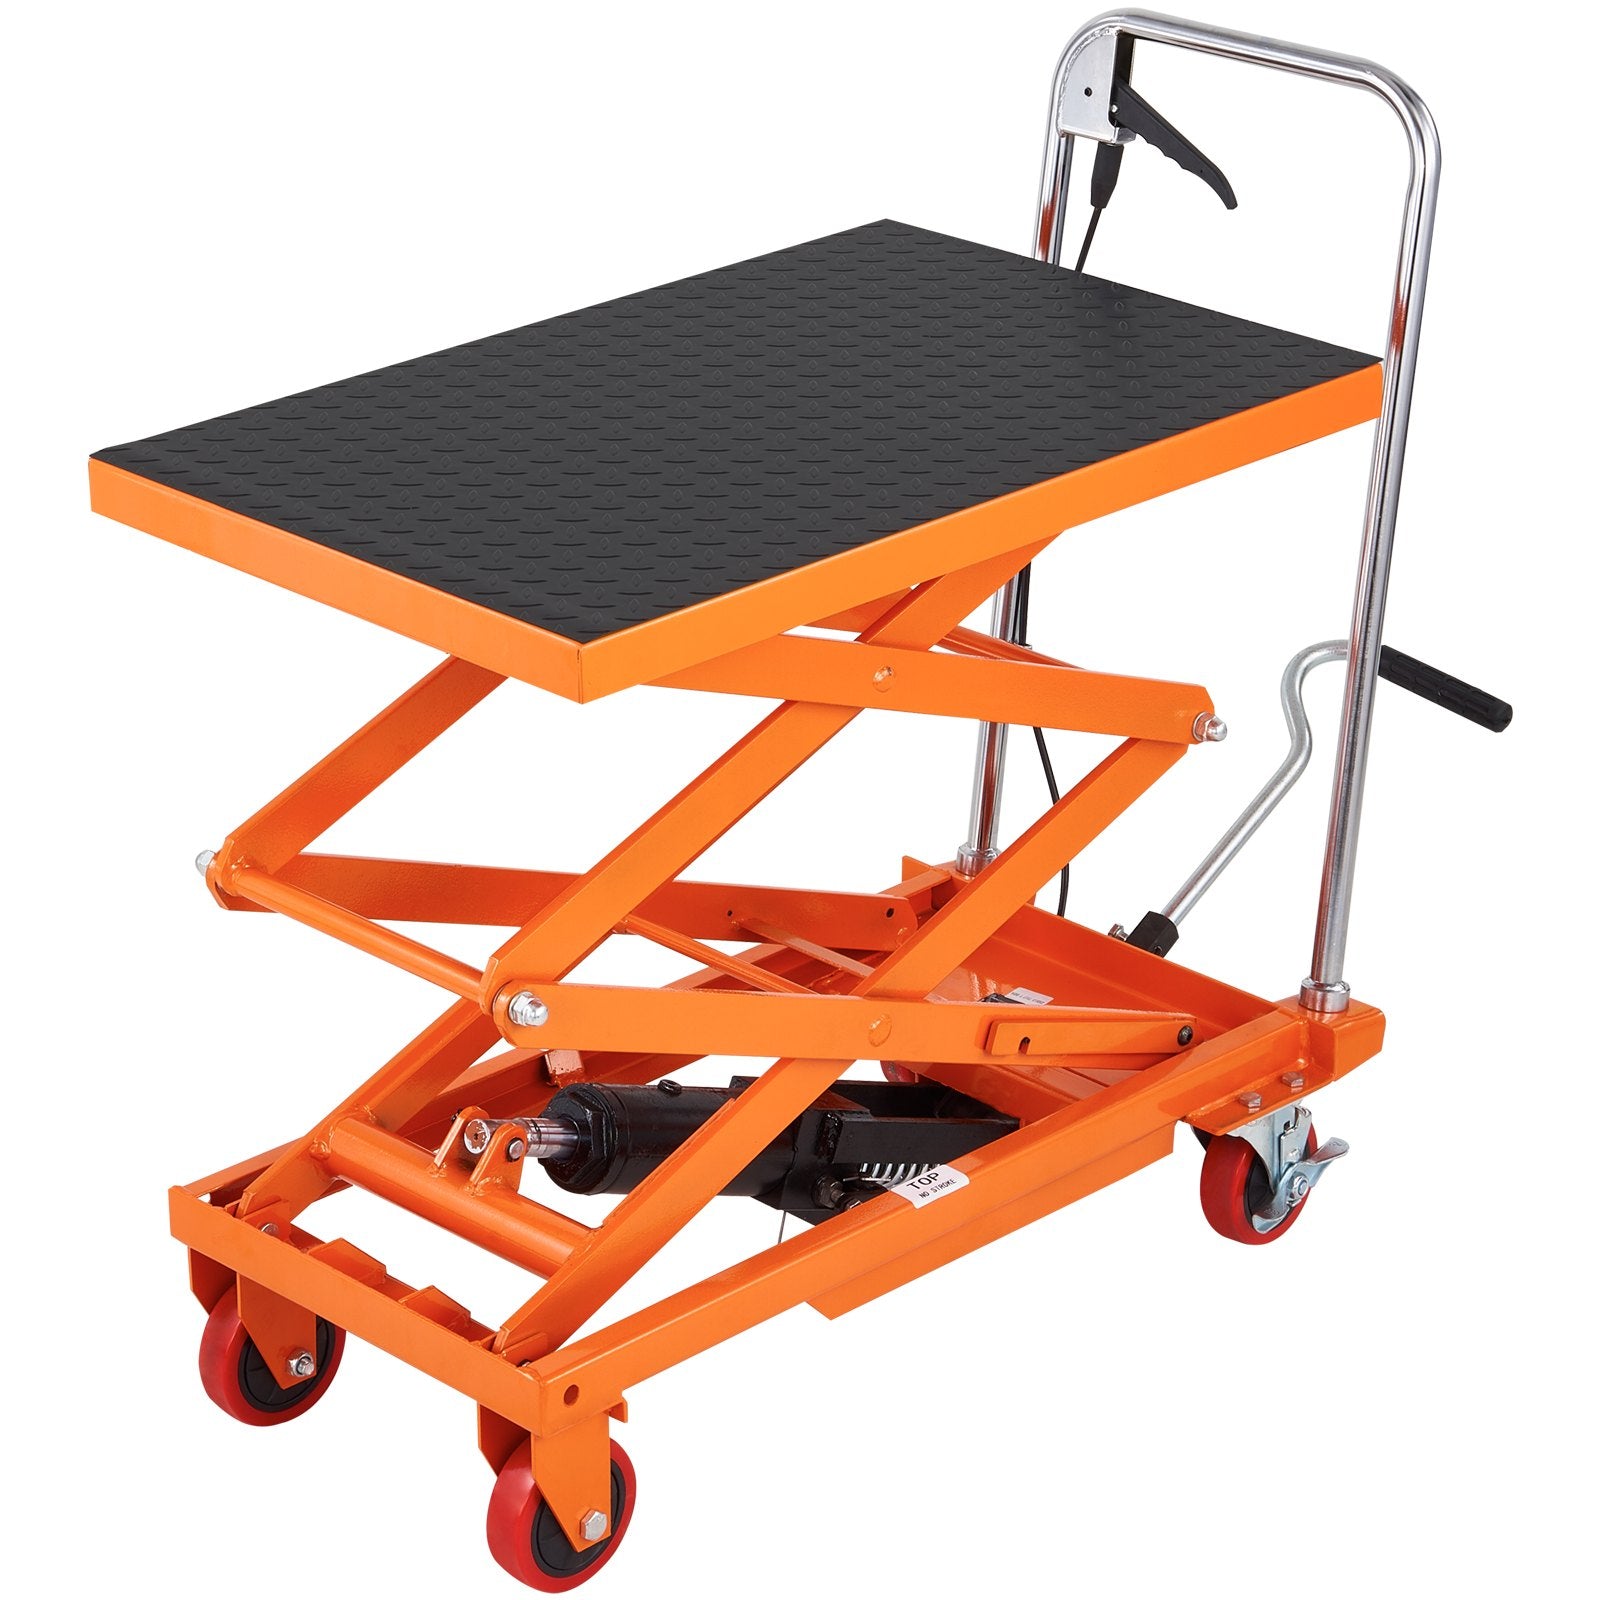 VEVOR Hydraulic Lift Table Cart, 330lbs Capacity 50" Lifting Height, Manual Double Scissor Lift Table with 4 Wheels and Non-slip Pad